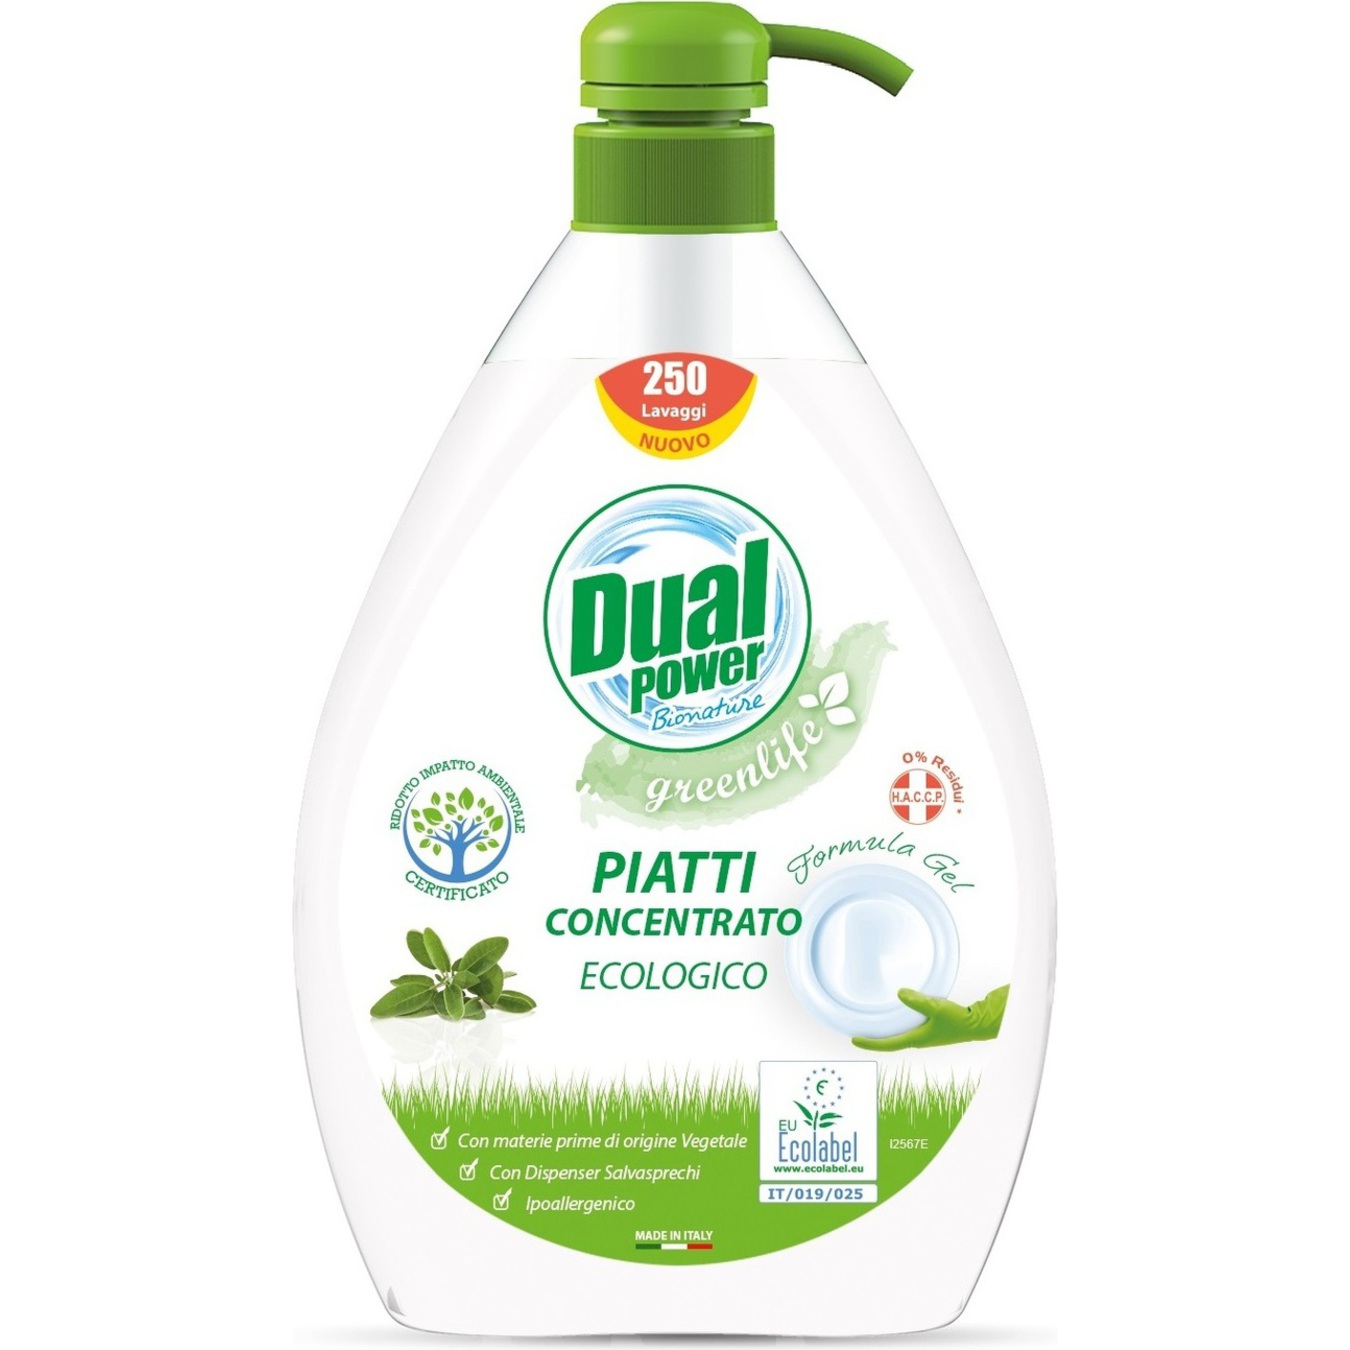 Dual Power Green Life Concentrated Dishwashing Gel 1l